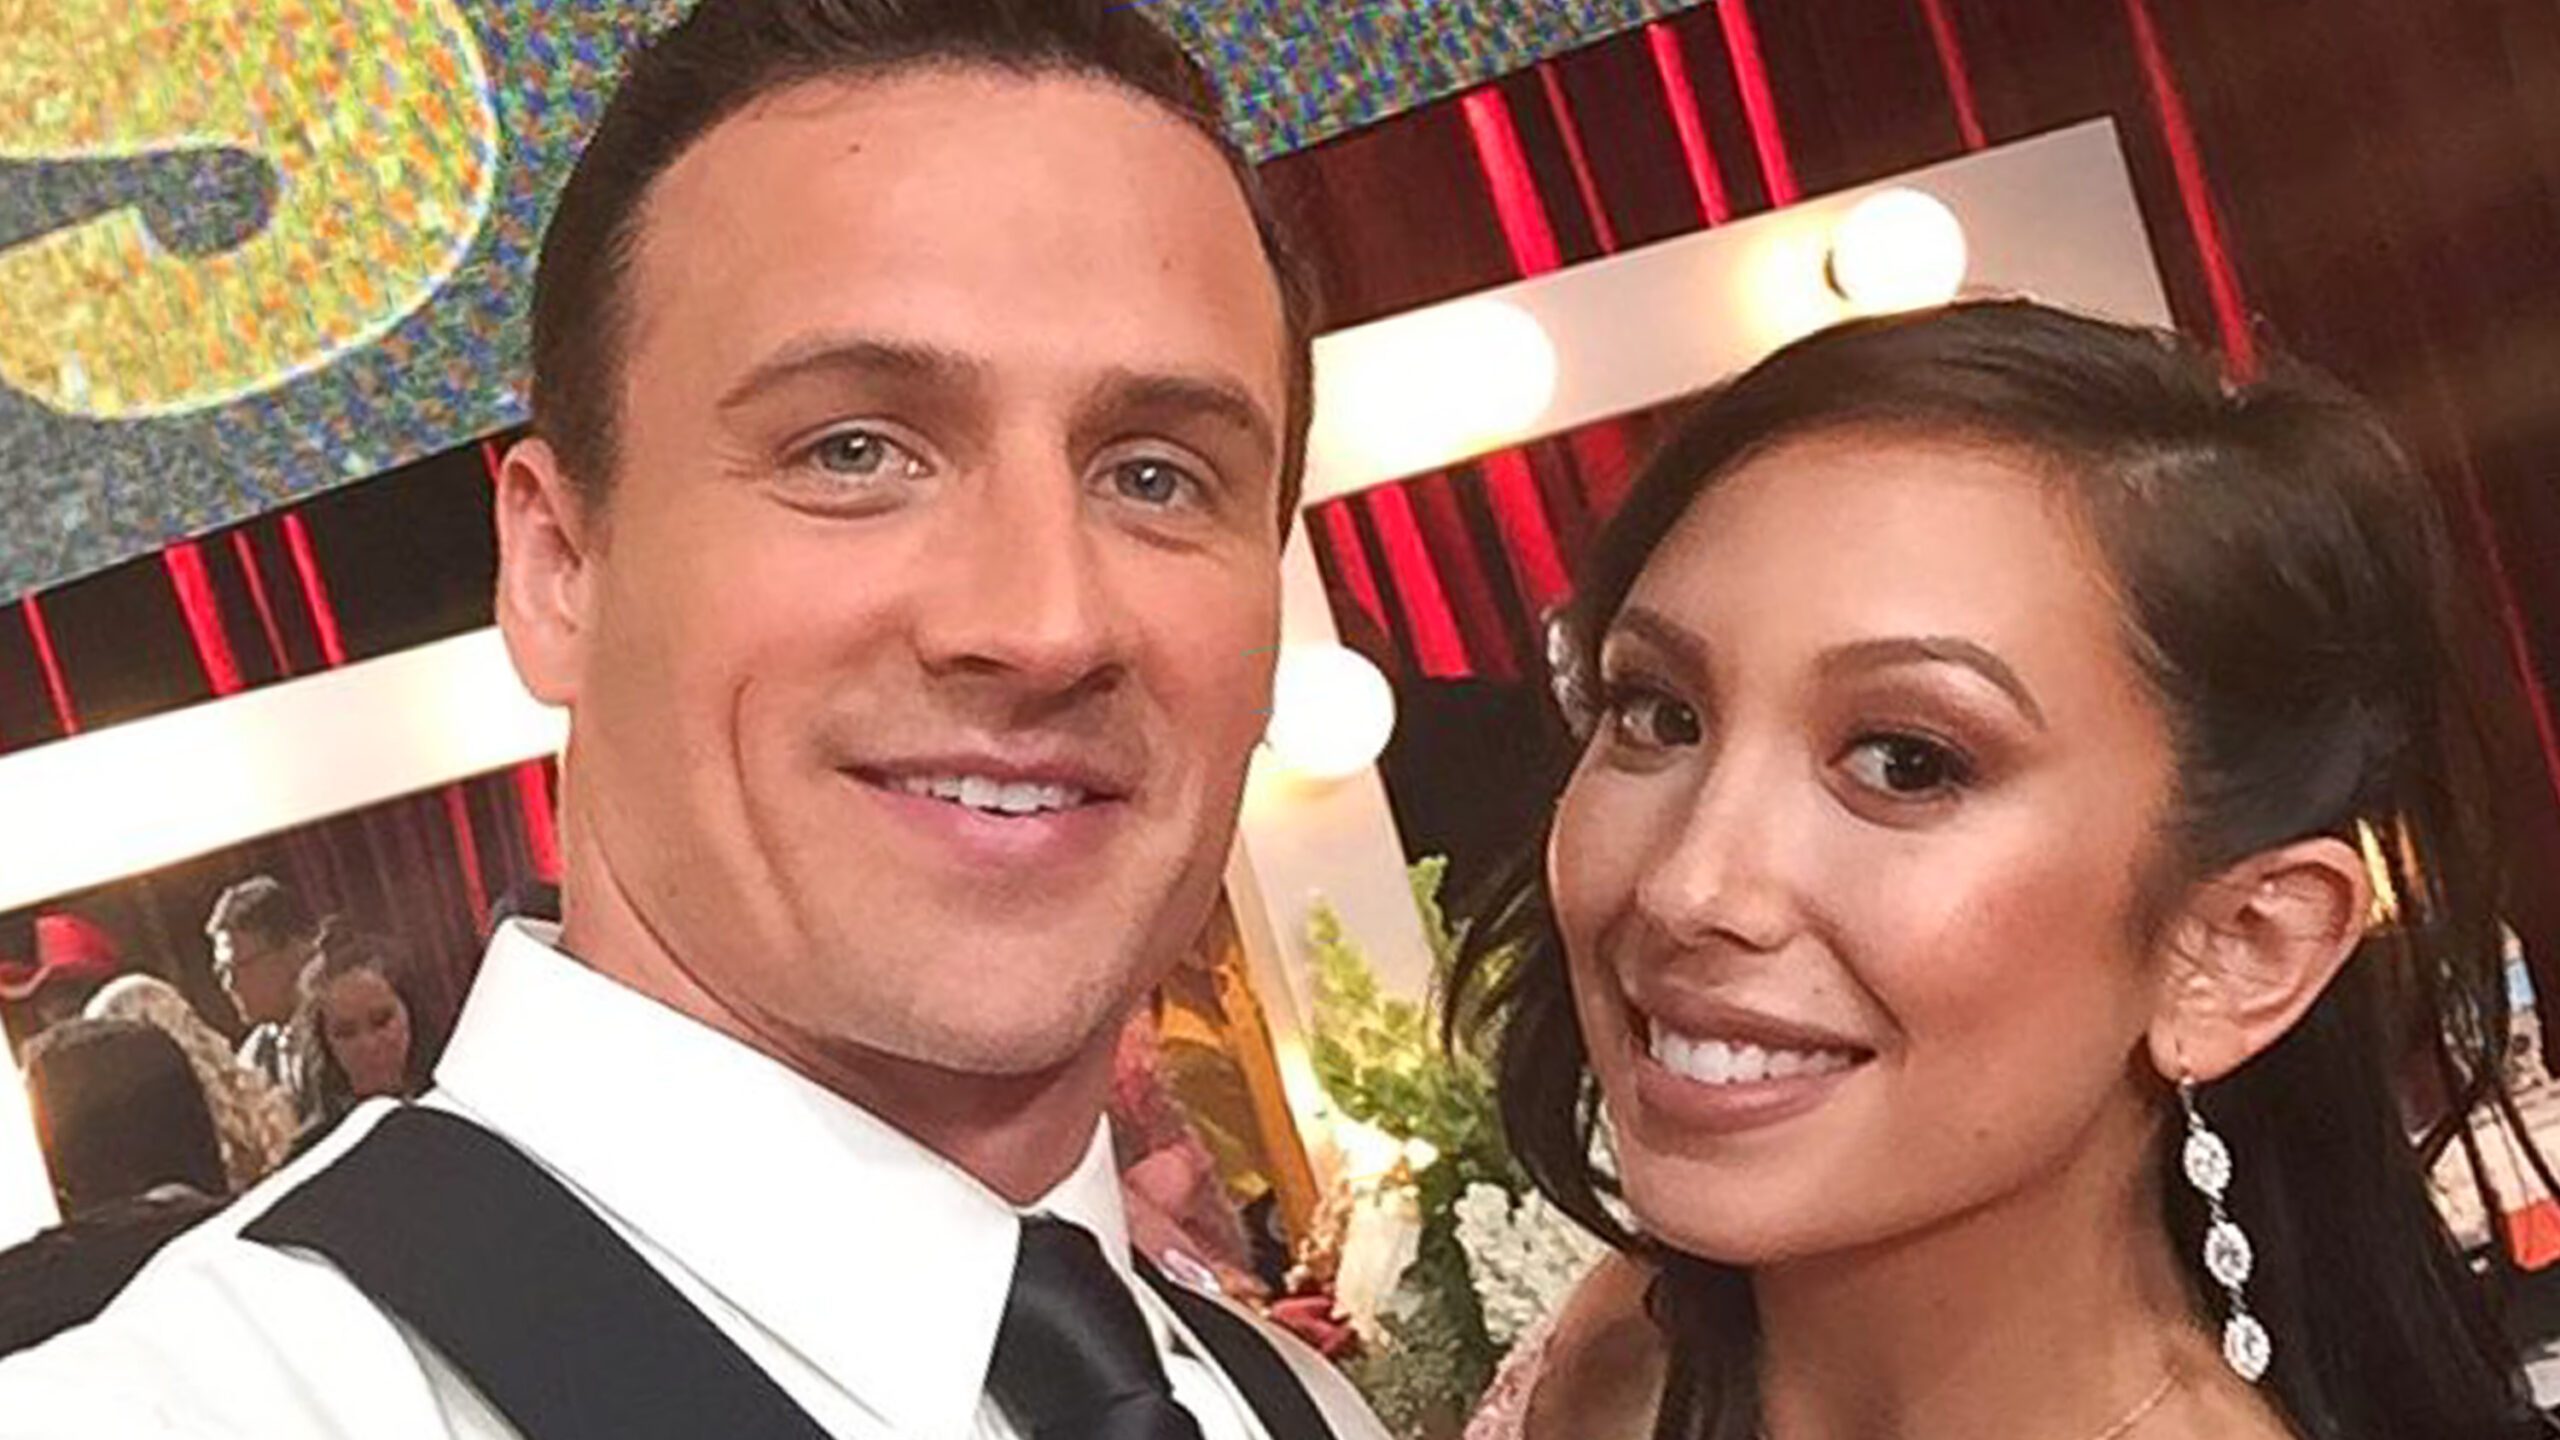 Protesters interrupt Ryan Lochte’s ‘Dancing With The Stars’ segment